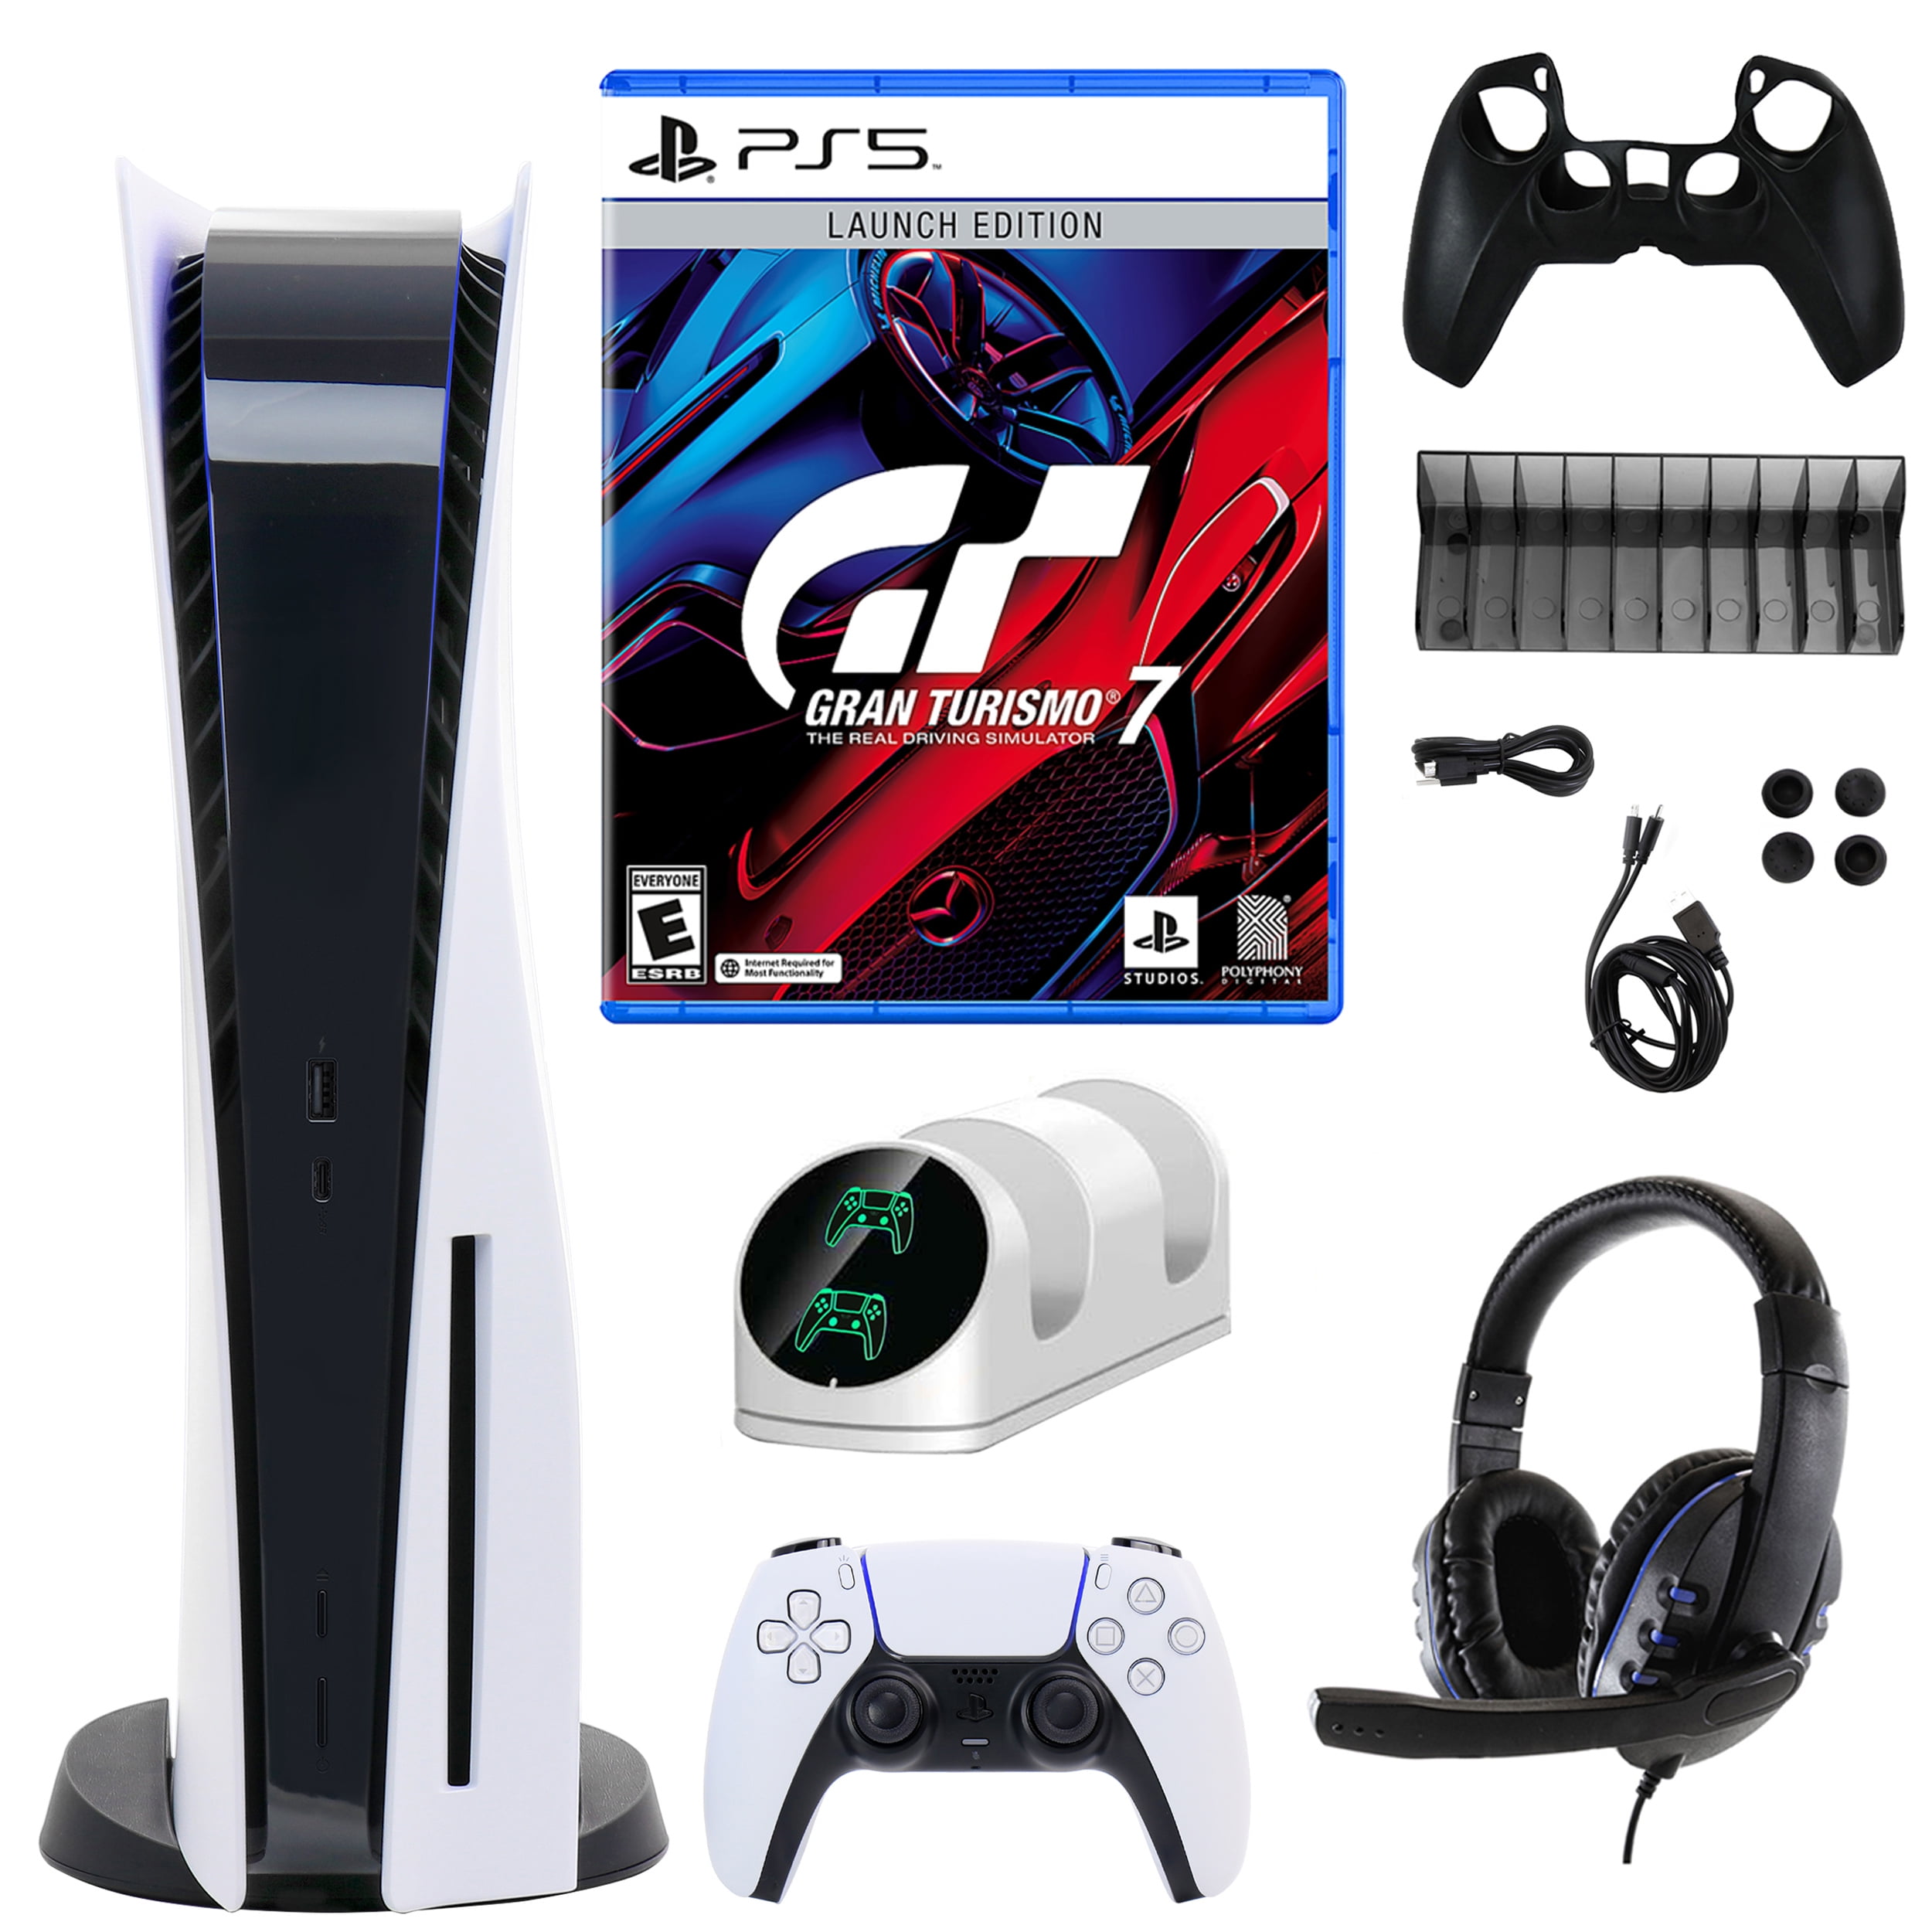 Standaard Luik Verdienen Sony PlayStation 5 Core with Gran Turismo 7 and Accessories Kit (PS5,  PlayStation Disc Version) - Walmart.com